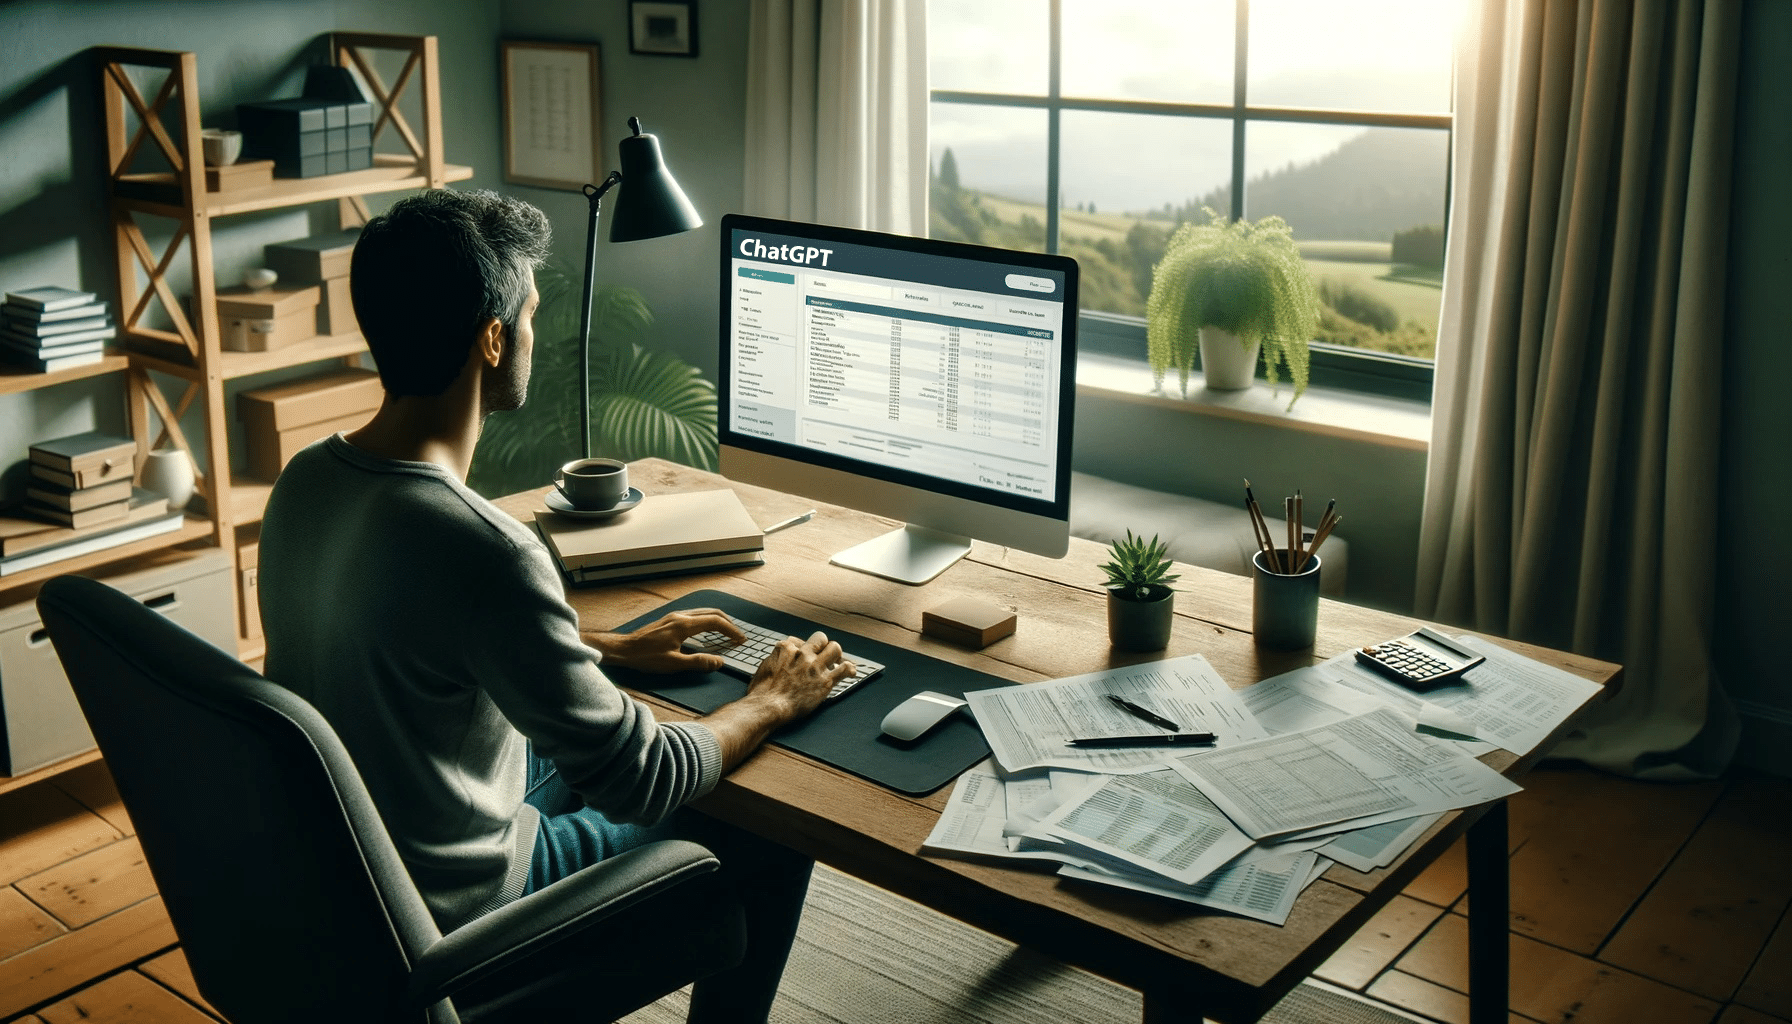 A person sits in a comfortable home office, using a computer with a ChatGPT AI Chatbot interface on the screen.